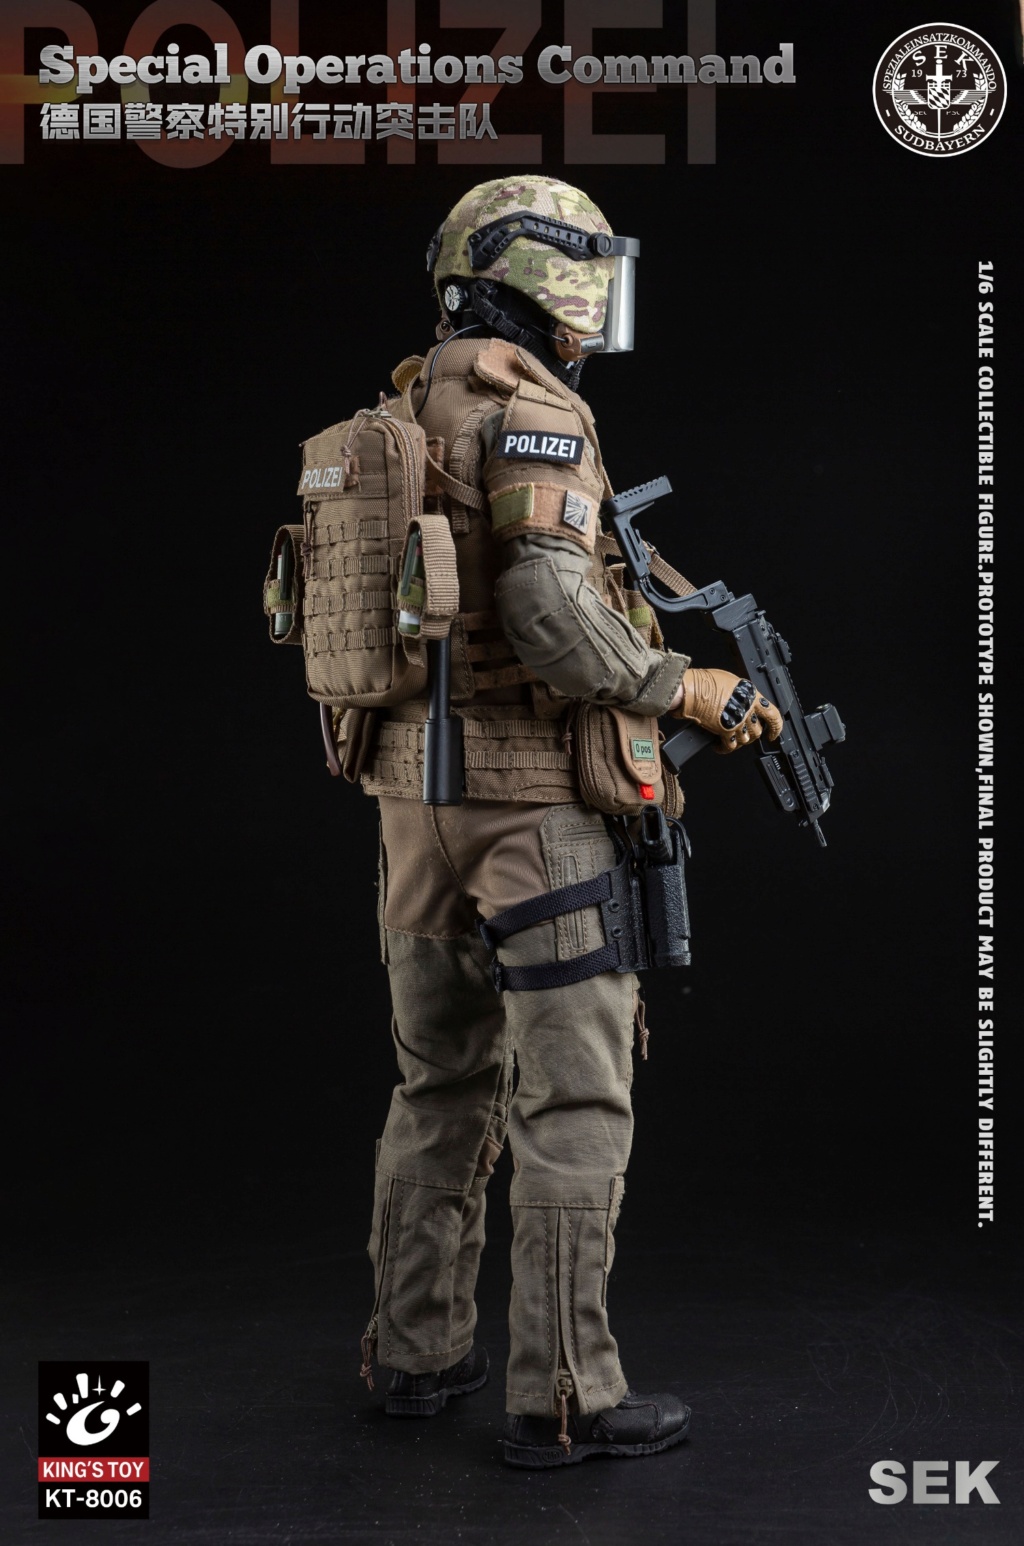 SEK - NEW PRODUCT: King's Toy #KT-8006 1/6 Scale Special Operations Command SEK 09241111